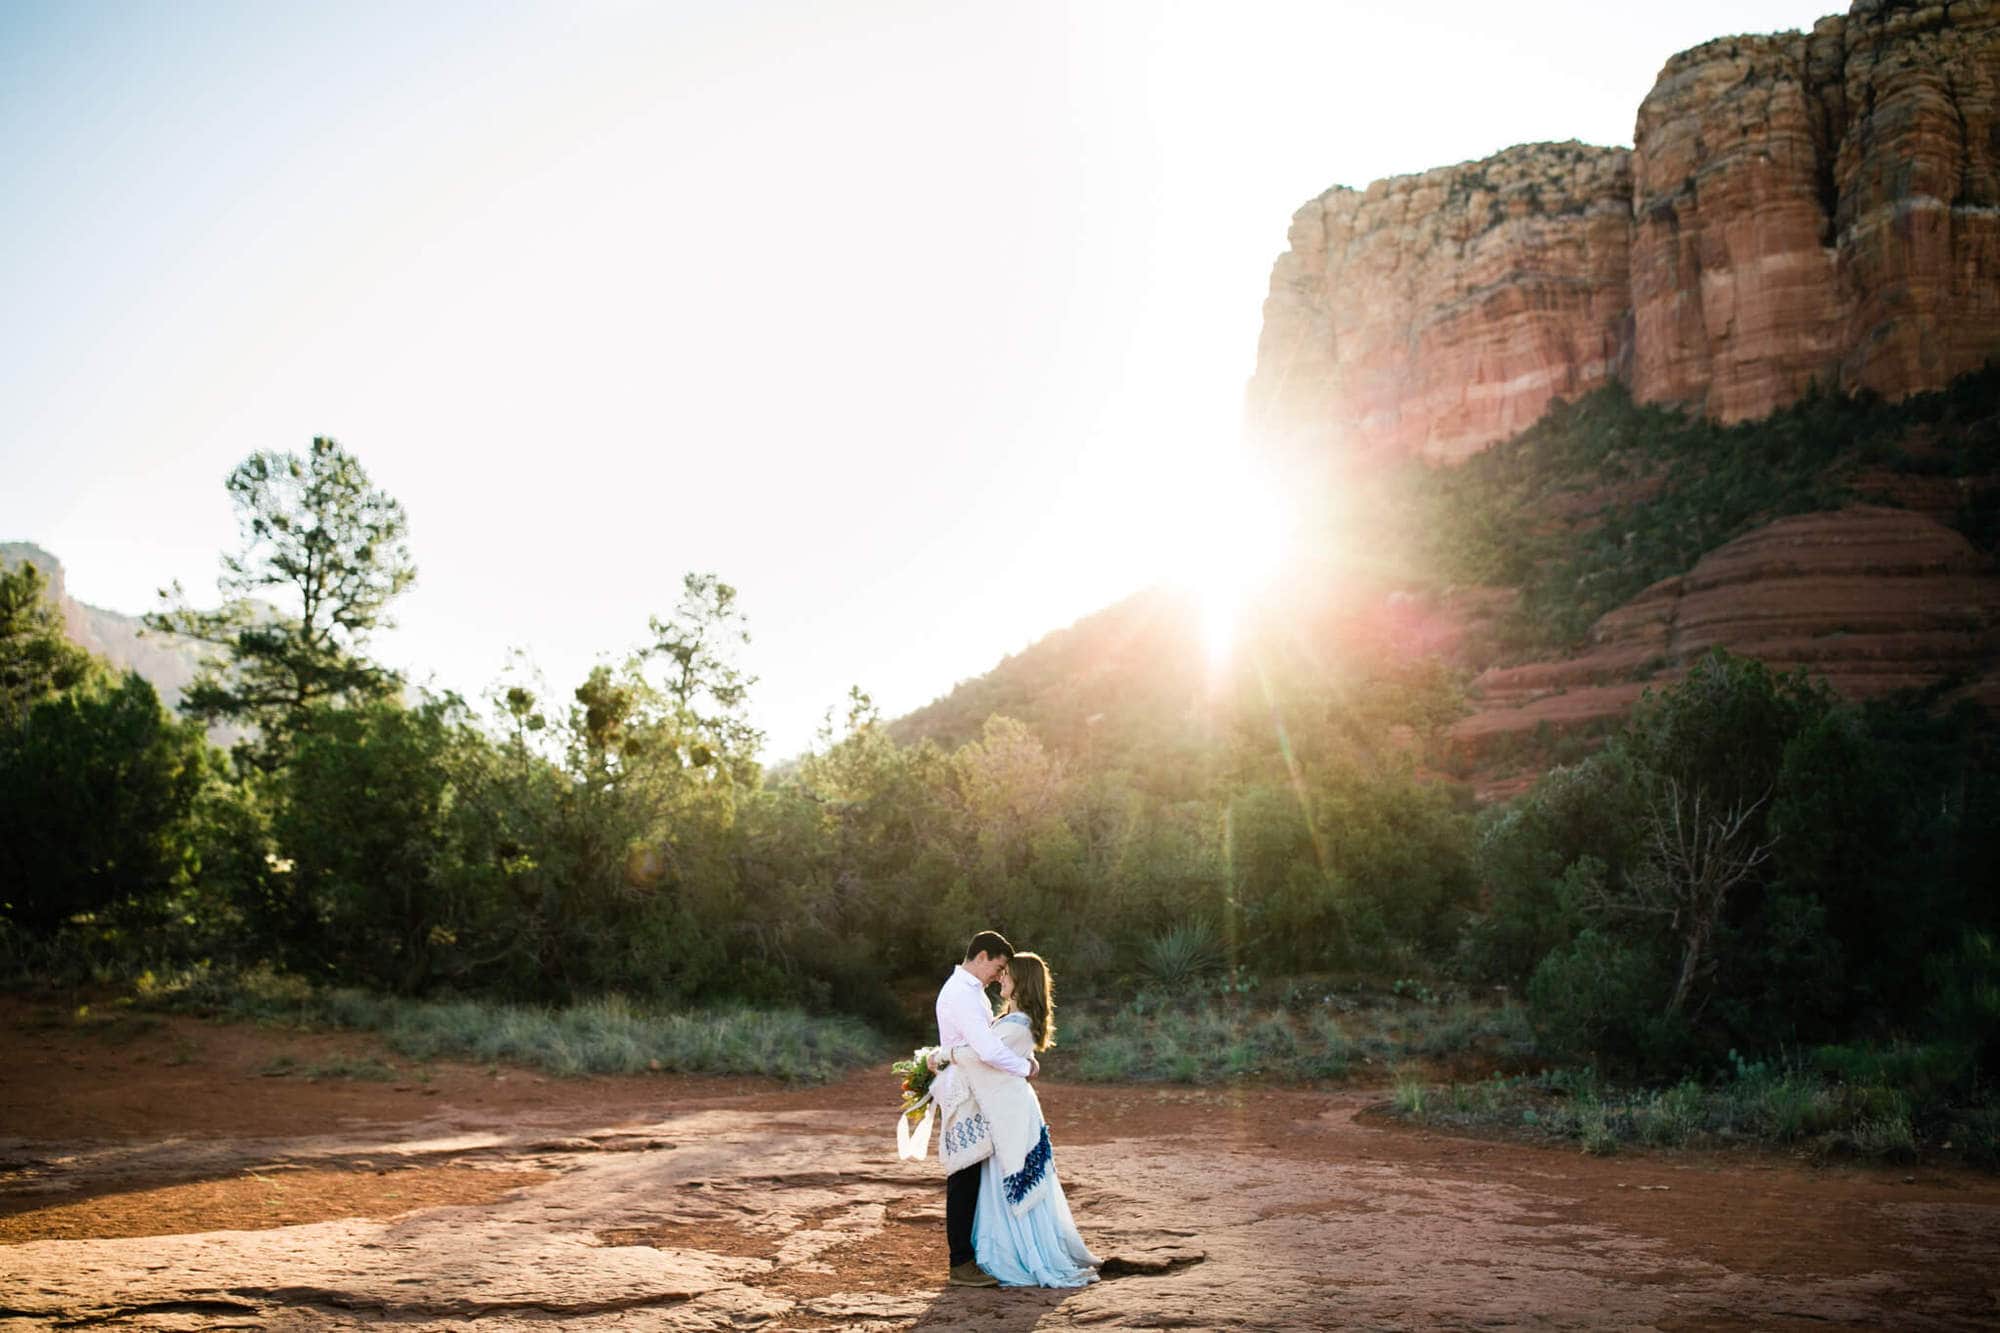 If you're planning a Sedona elopement or love red rocks and the sun, check out this Sedona Adventure Wedding for some major desert elopement inspiration!